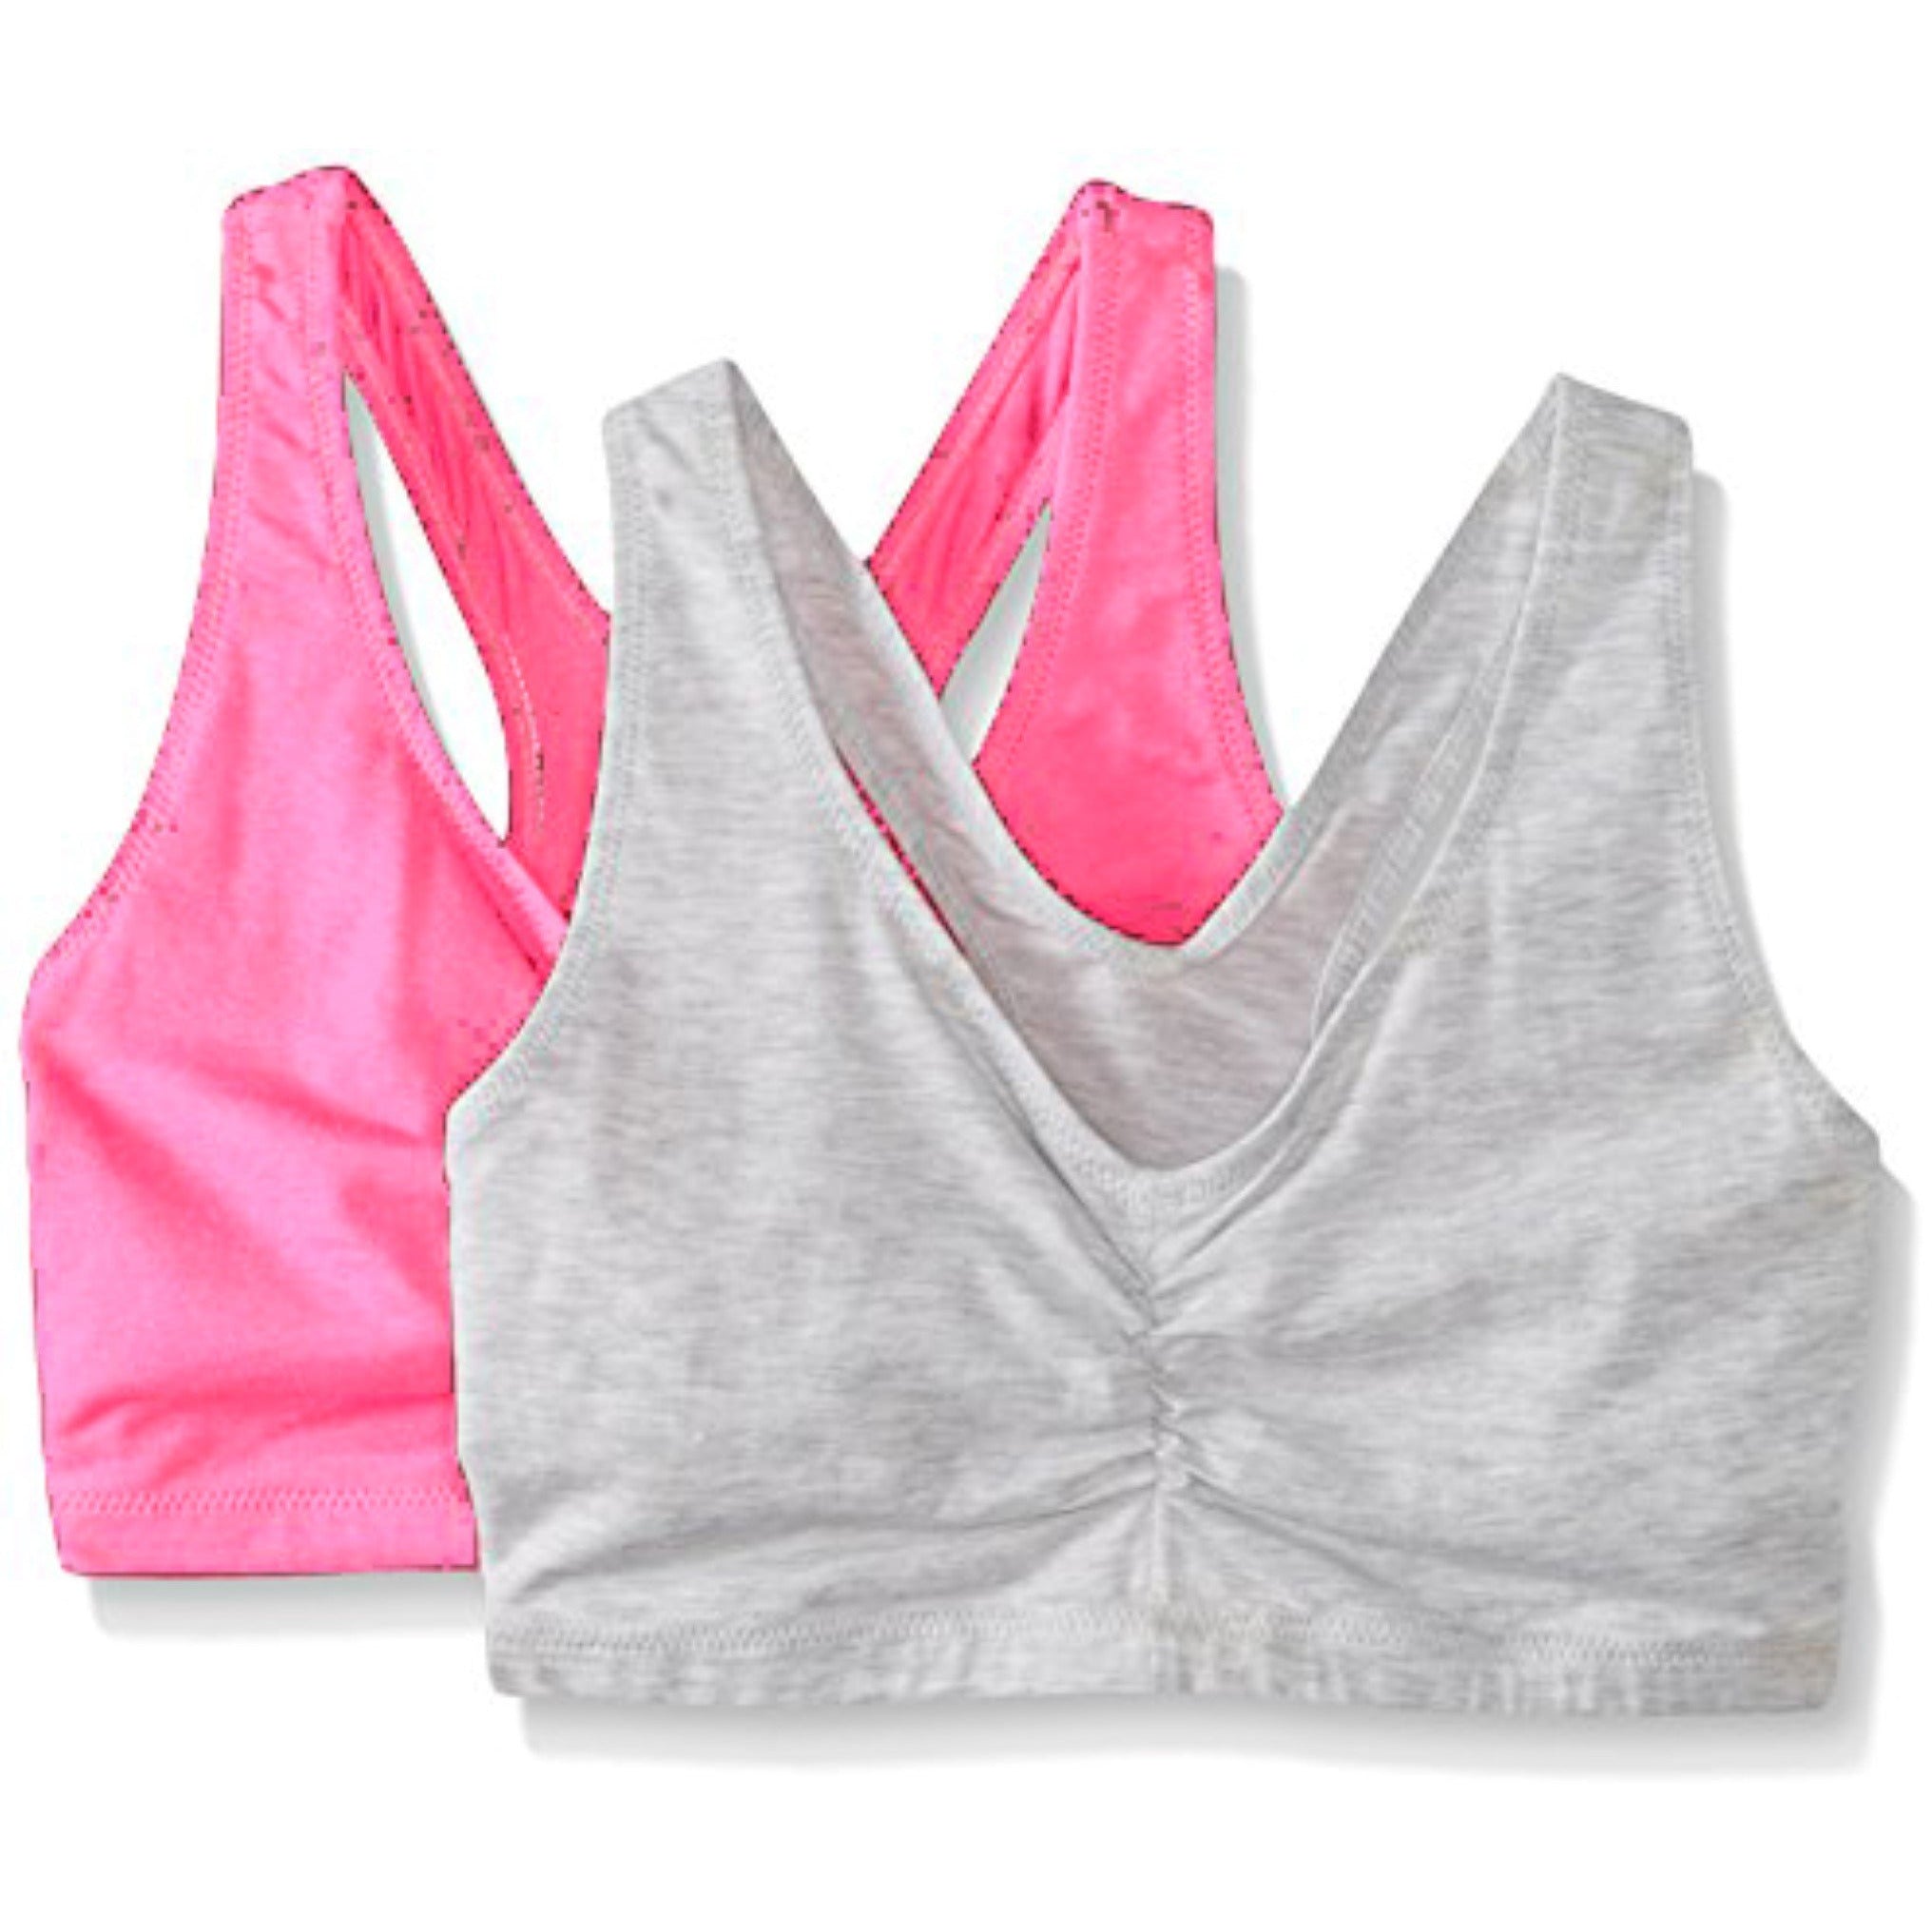 New with tags! Hanes Women's X-Temp ComfortFlex Fit Pullover Bra